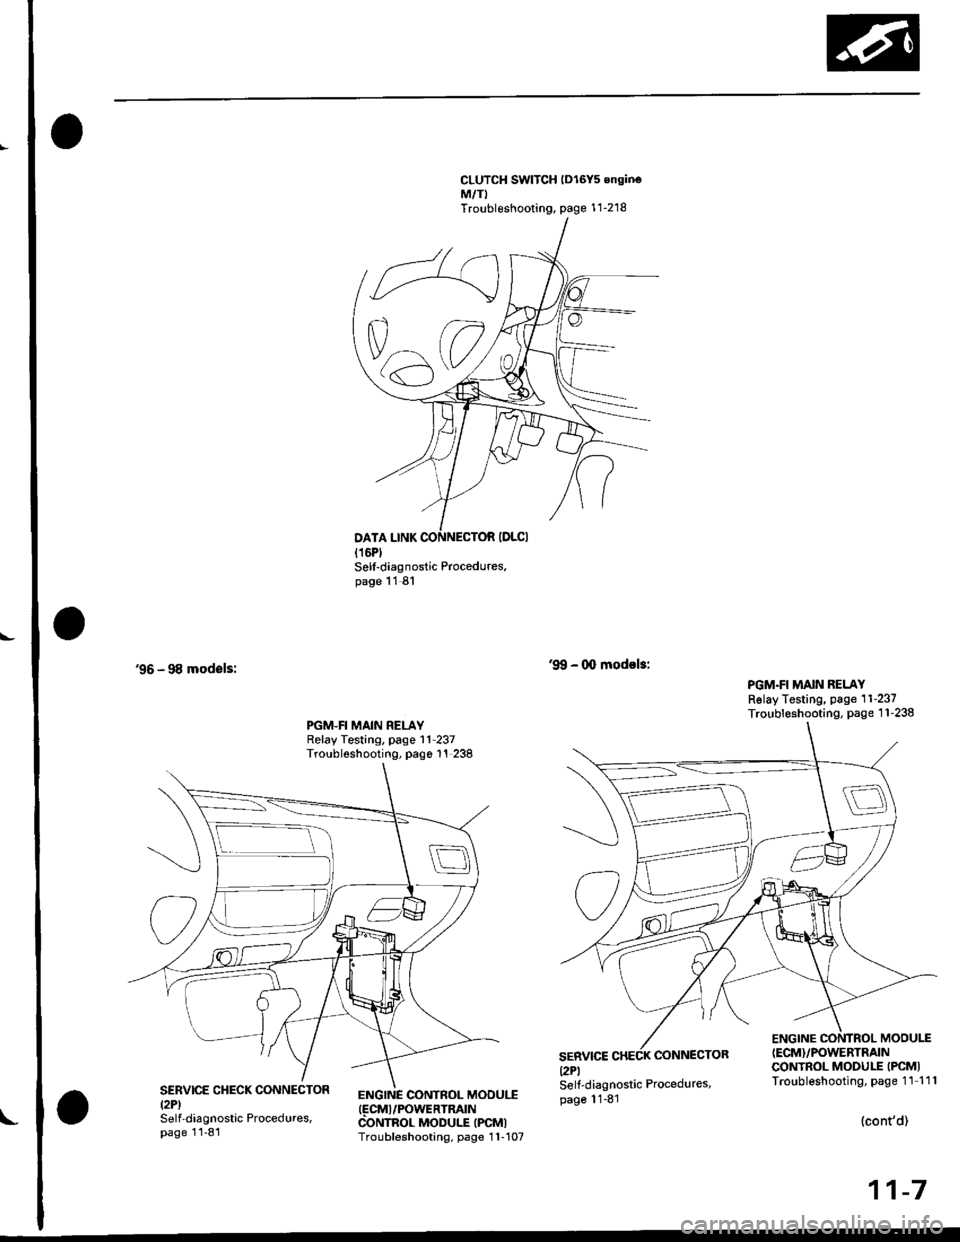 HONDA CIVIC 1998 6.G Workshop Manual I
CLUTCH SWITCH lDl6Y5 onginoM,/TITroubleshooting, page 1 1-218
96 - 98 modsls:
Sell-diagnostic Procedures.page 11 81
ENGINC CONTROL MOOUI.T(FCMI/POWERTRATN
CONTROL MODULE IPCMITroubleshooting, page 